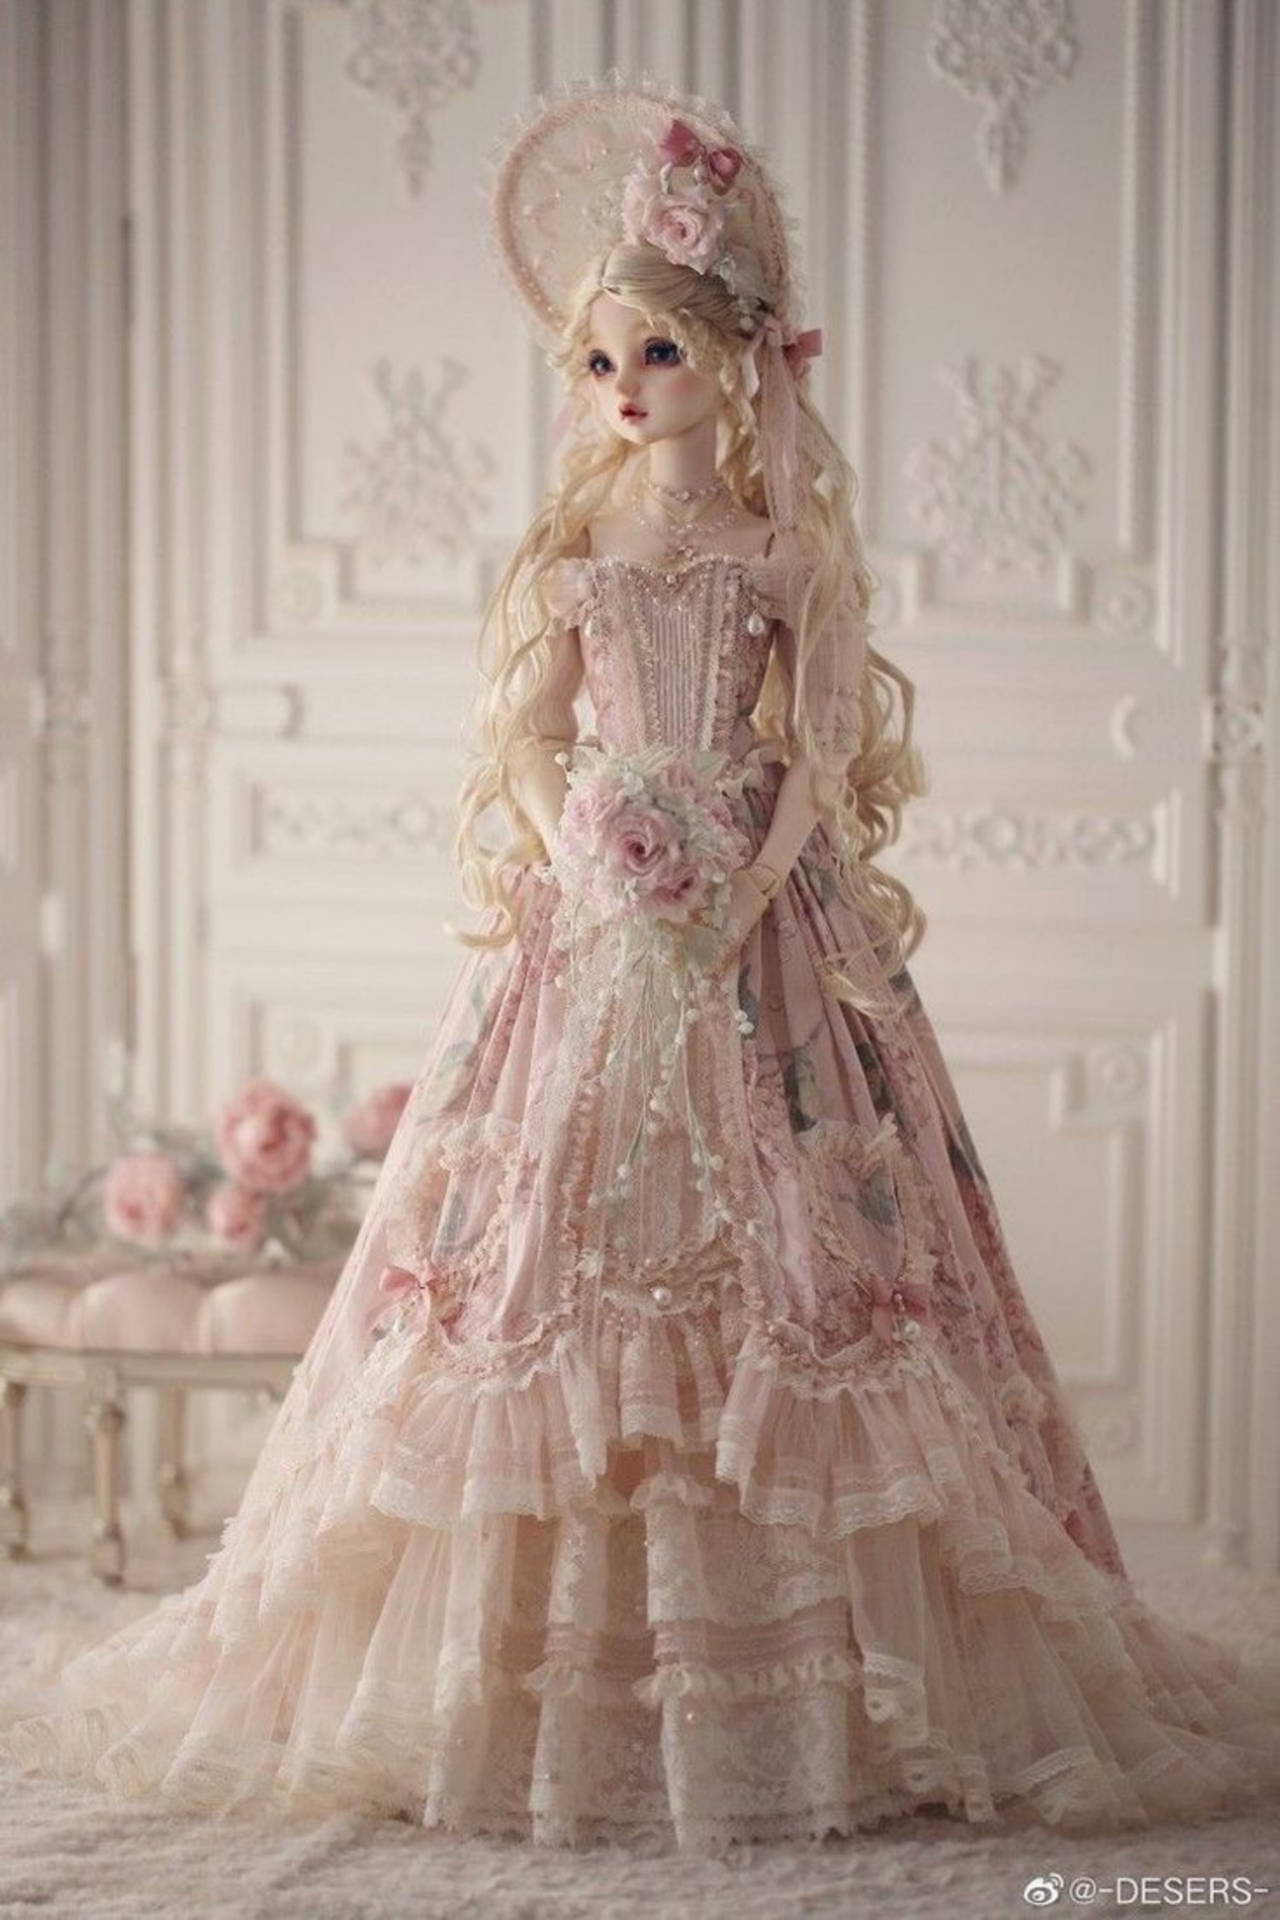 Barbie Doll In Princess Lolita Gown Background